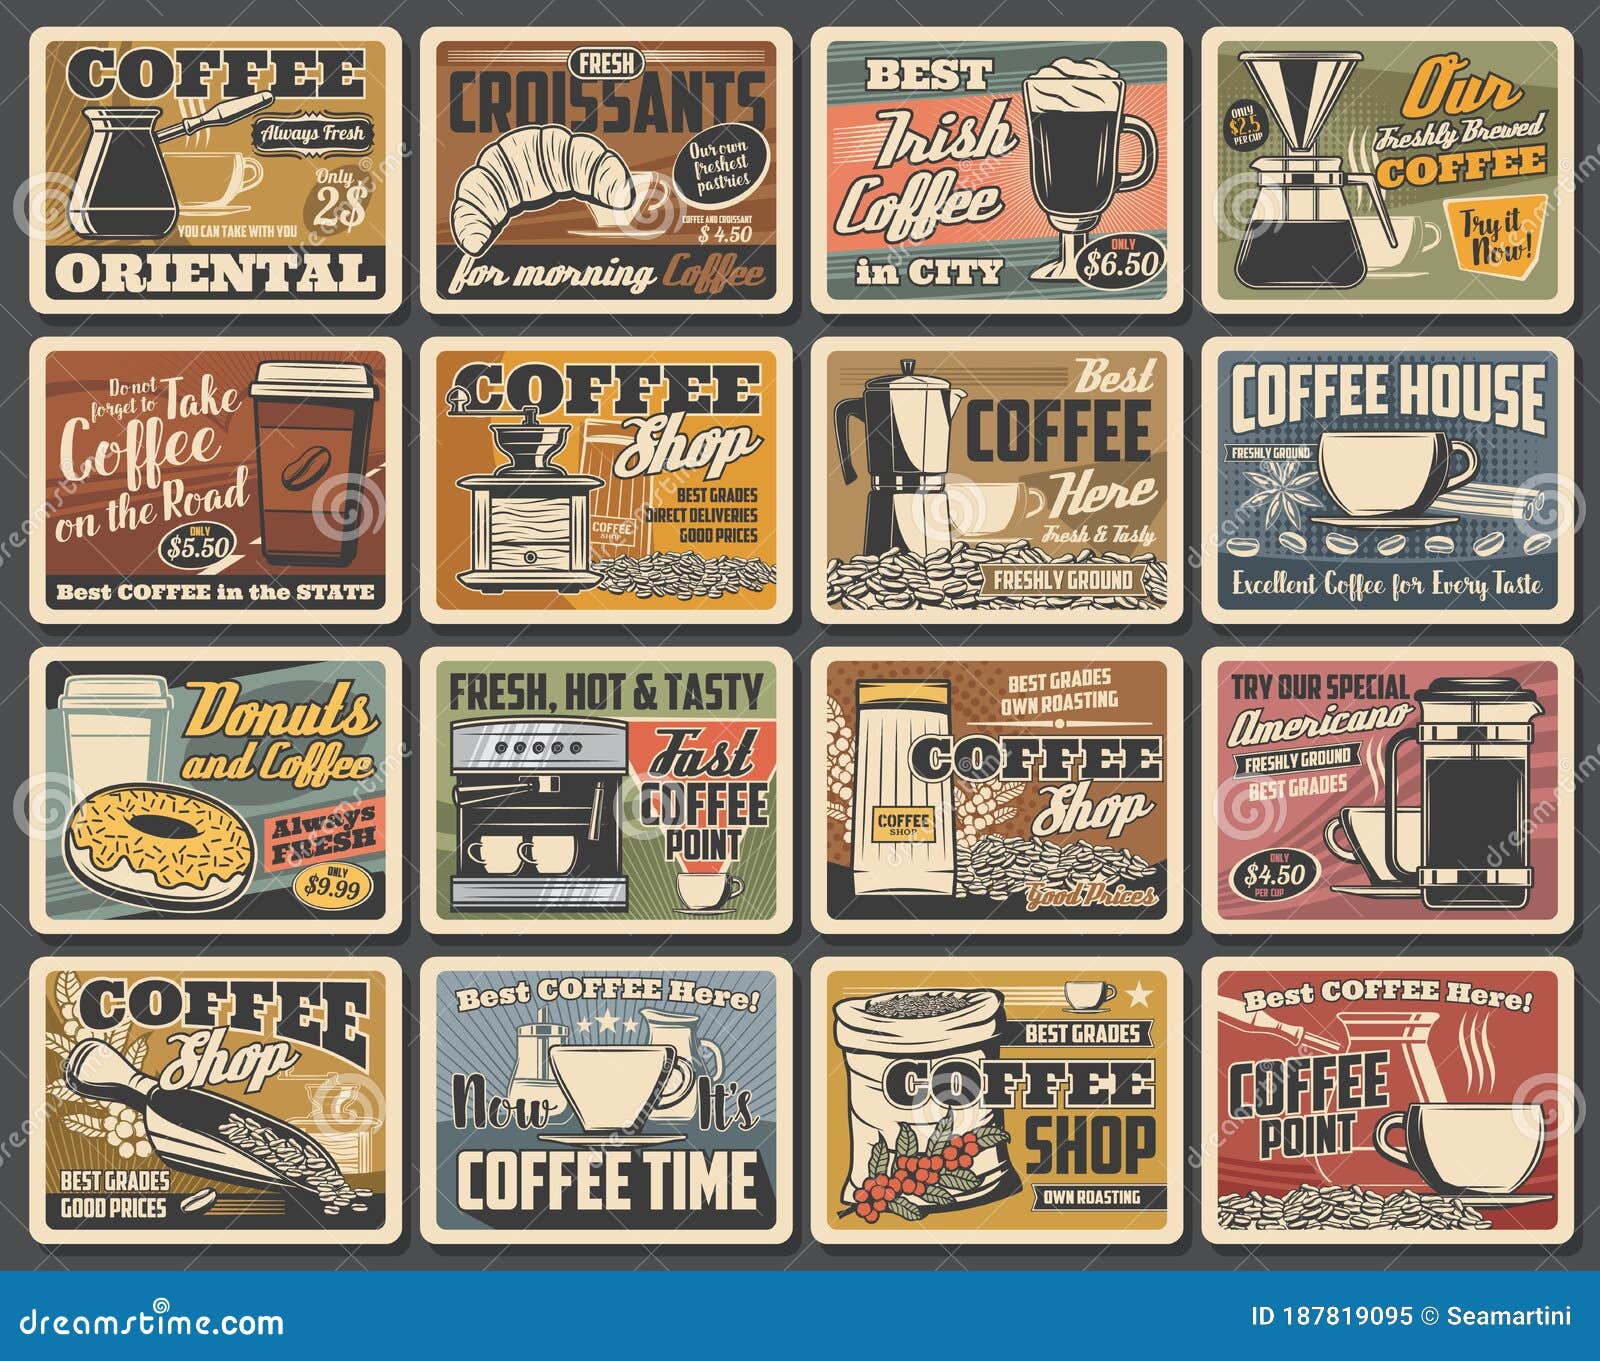 Coffee Retro Posters, Coffee Maker, Cafe Drinks Stock Vector ...